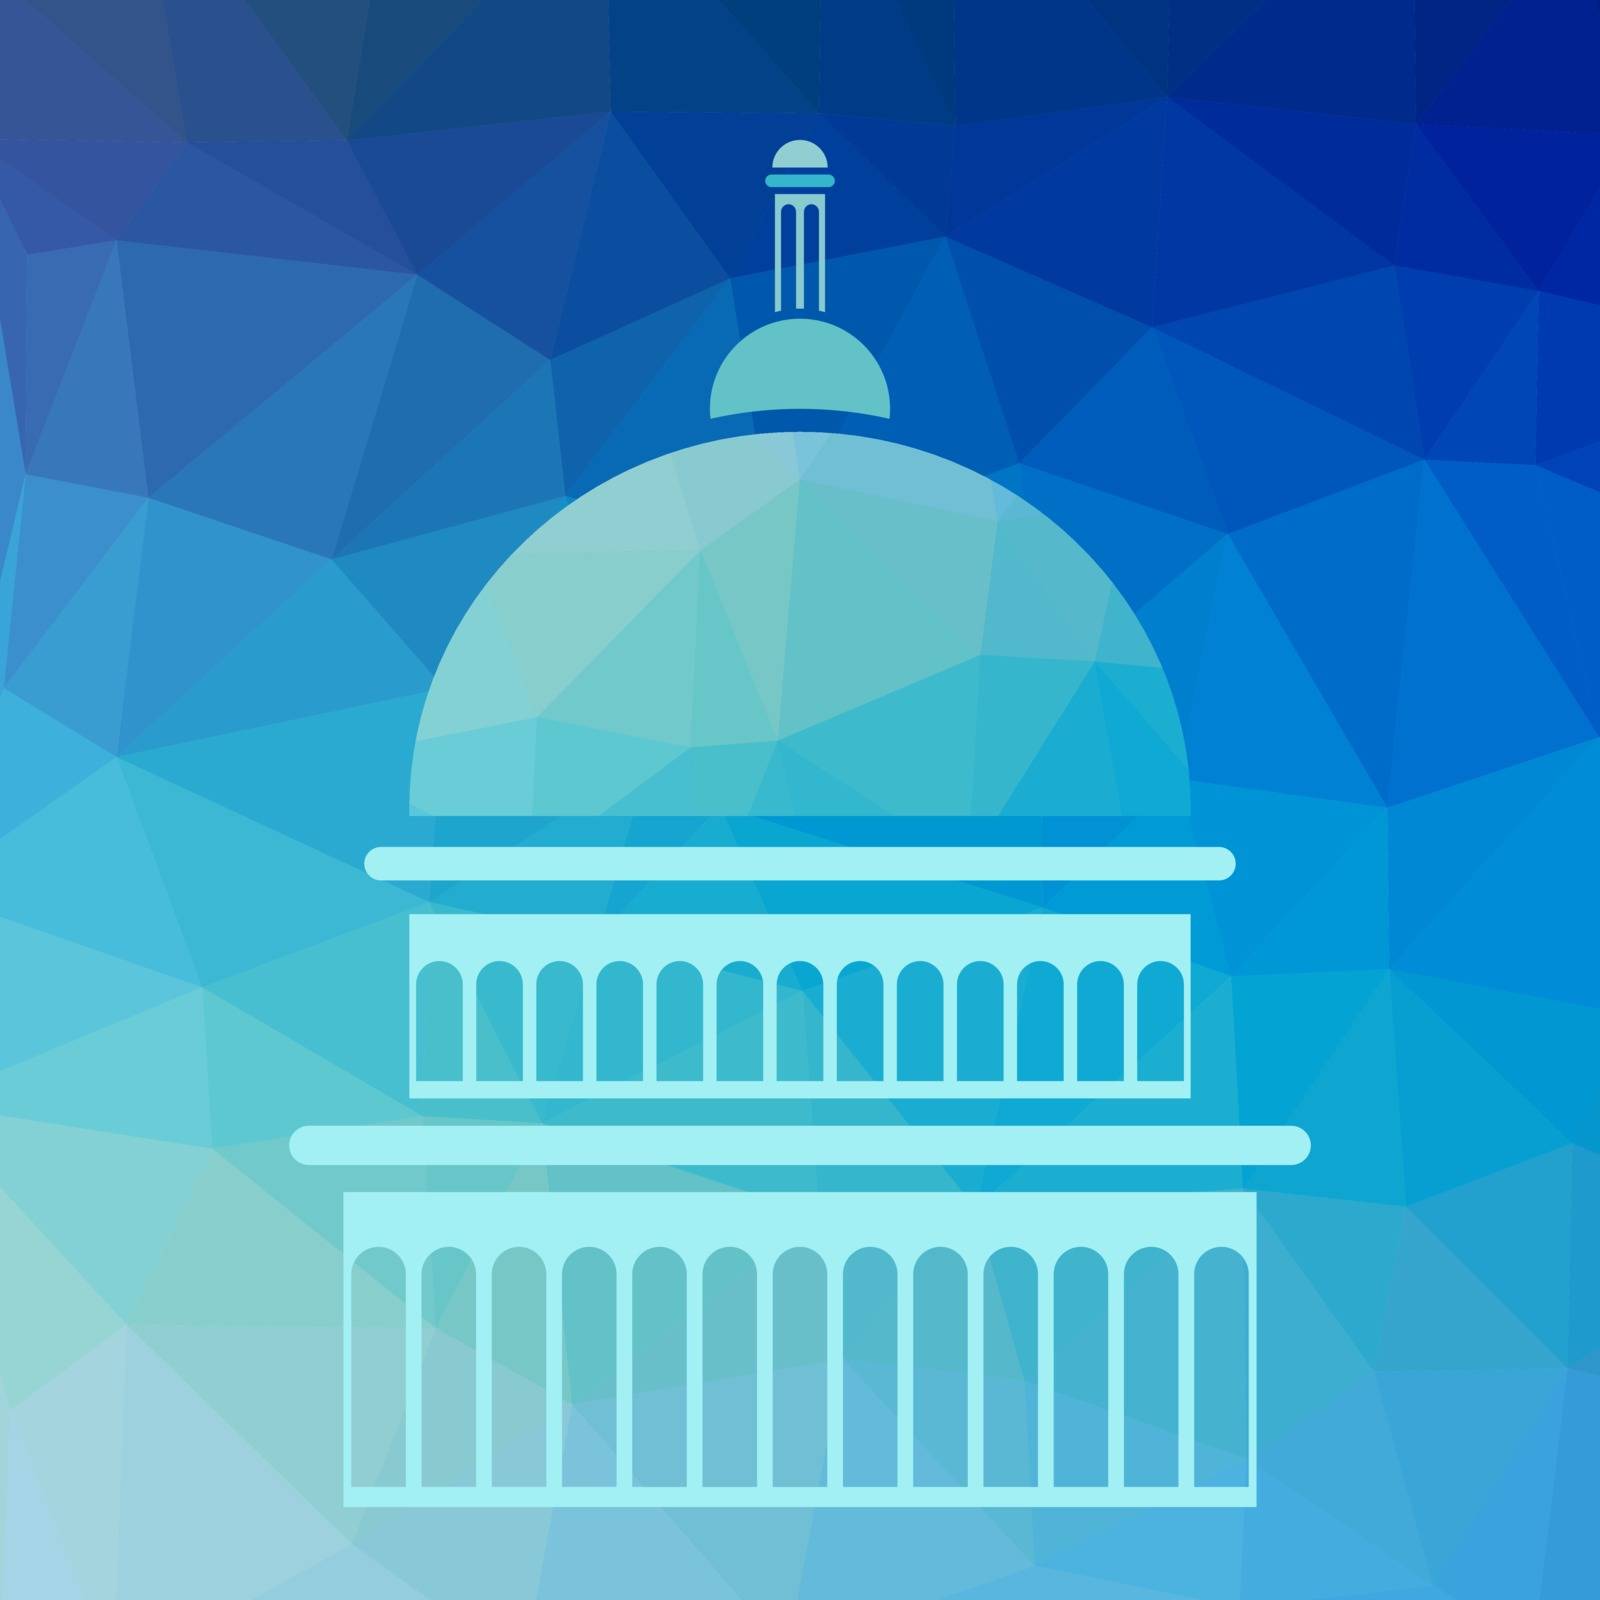 Capitol Silhouette Isolated on Blue Polygonal Background